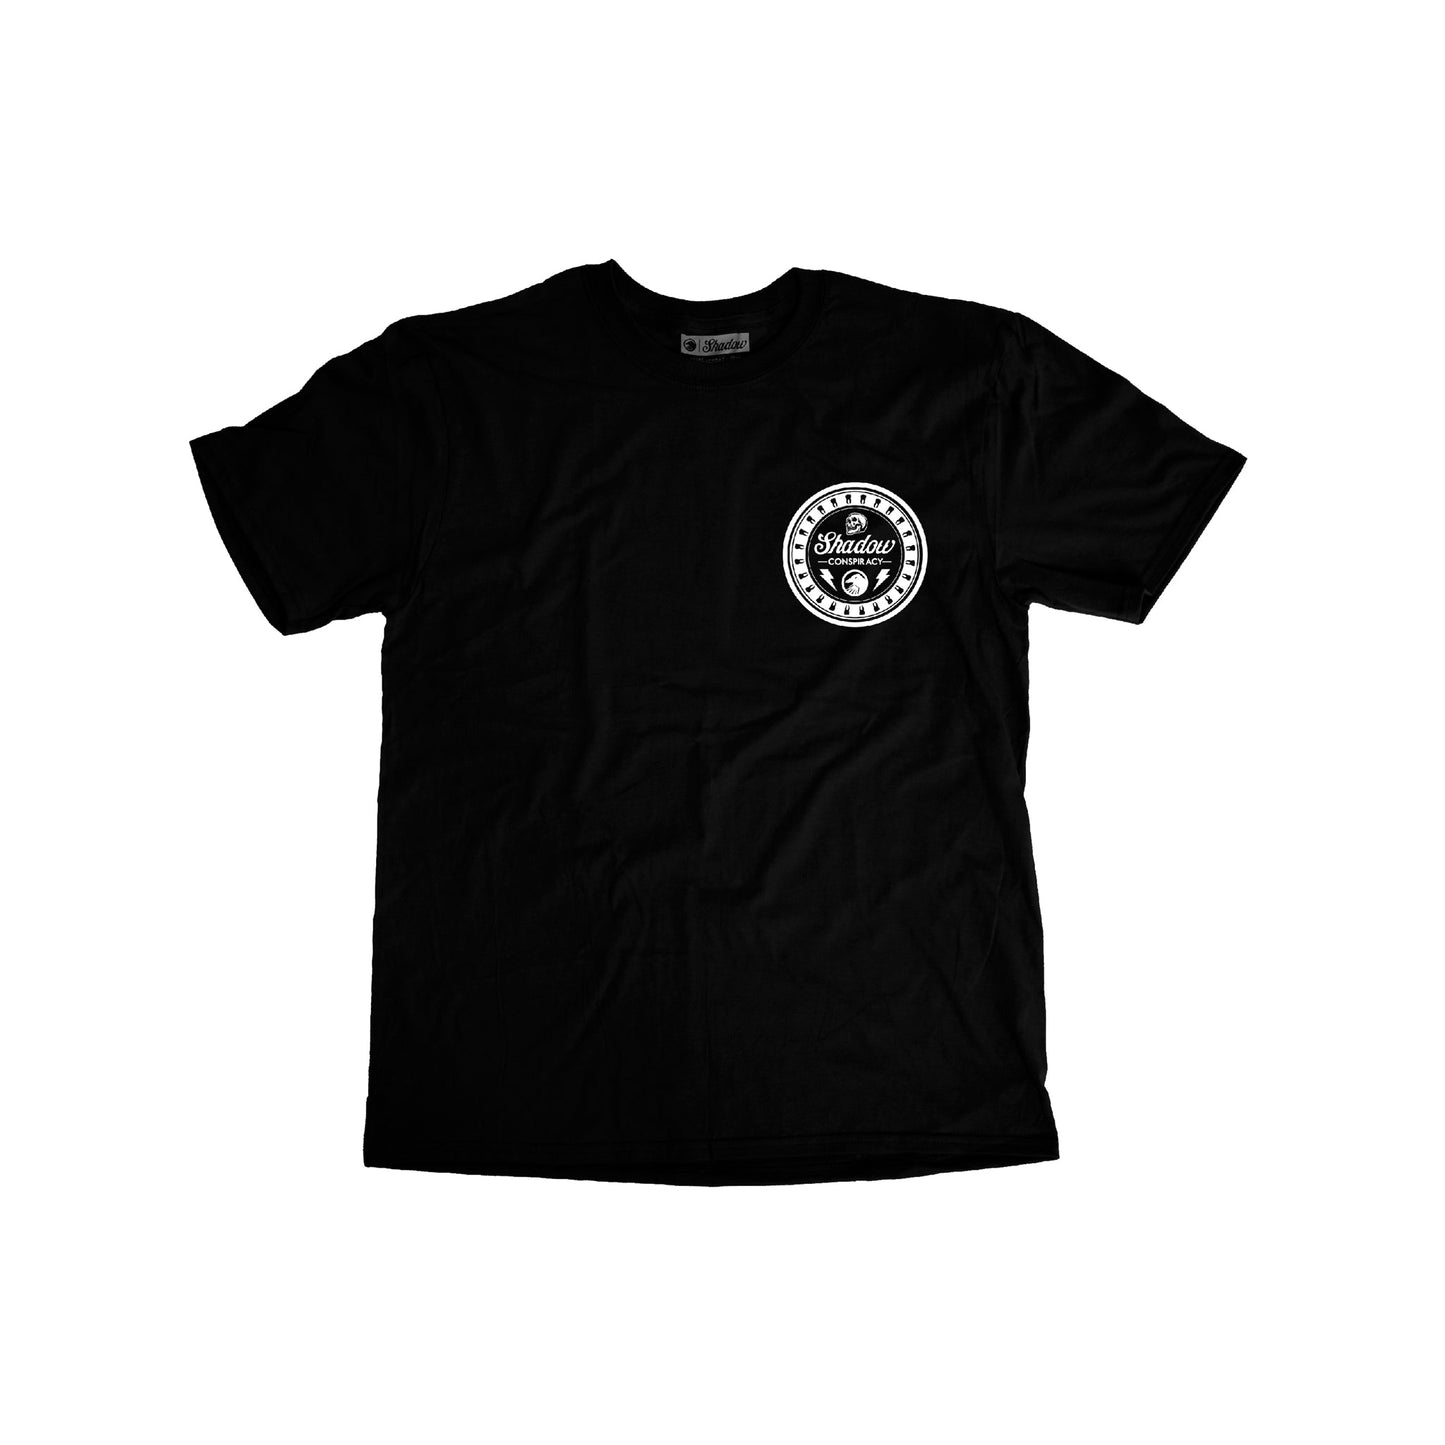 SHADOW Everlasting T-Shirt (Black) - Sparkys Brands Sparkys Brands  Apparel, Short Sleeve, T-Shirts, The Shadow Conspiracy bmx pro quality freestyle bicycle